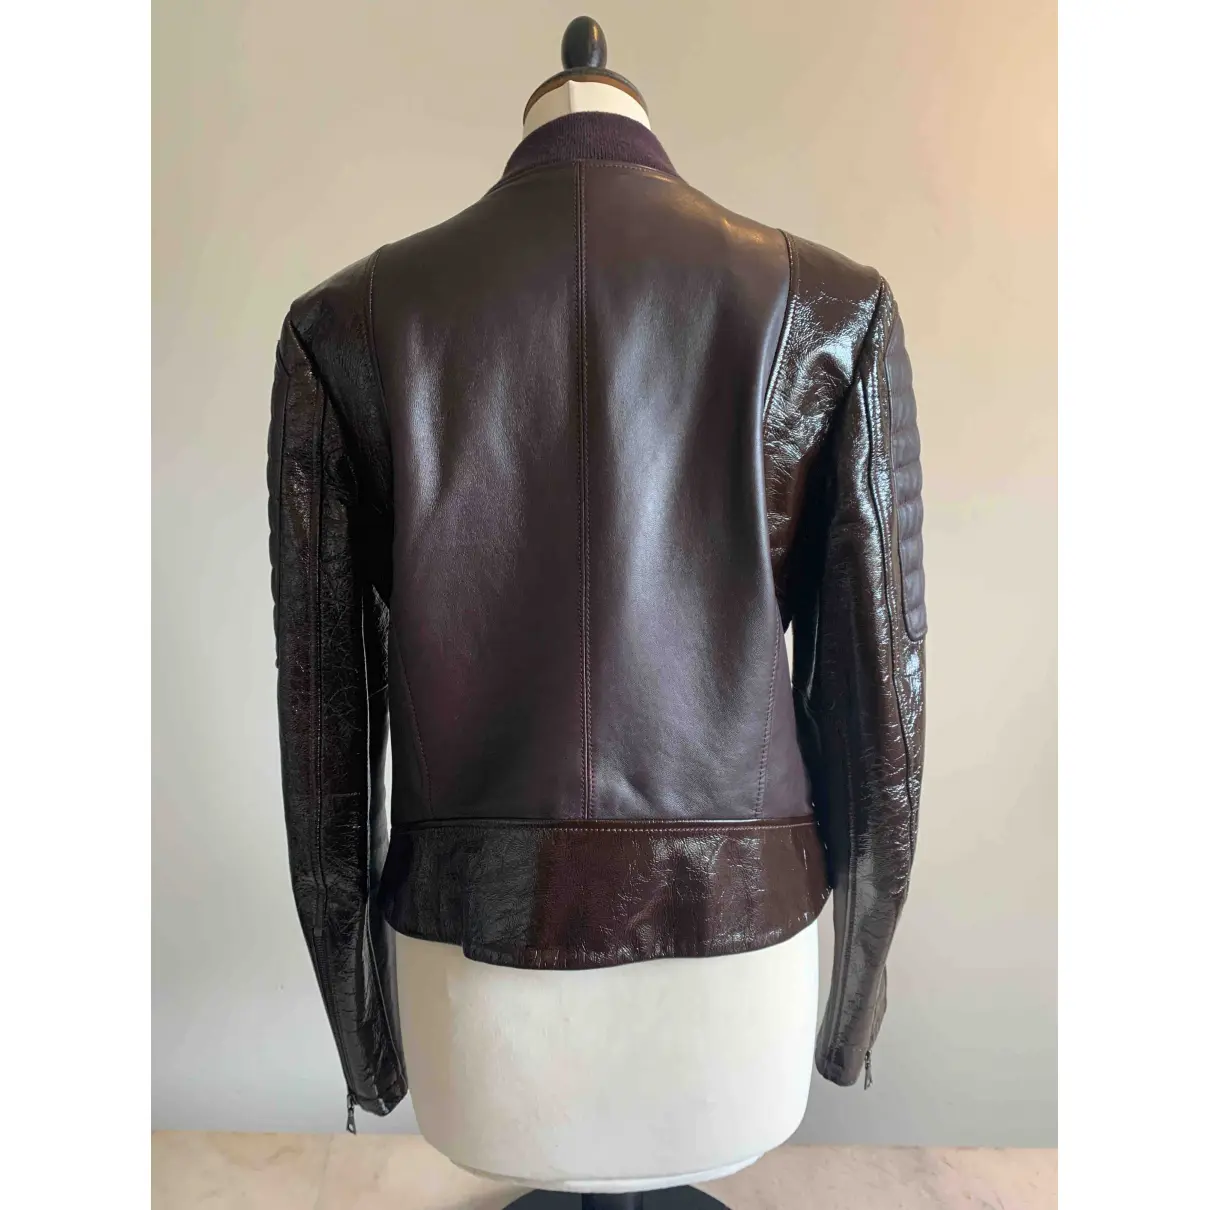 Buy Theory Leather jacket online